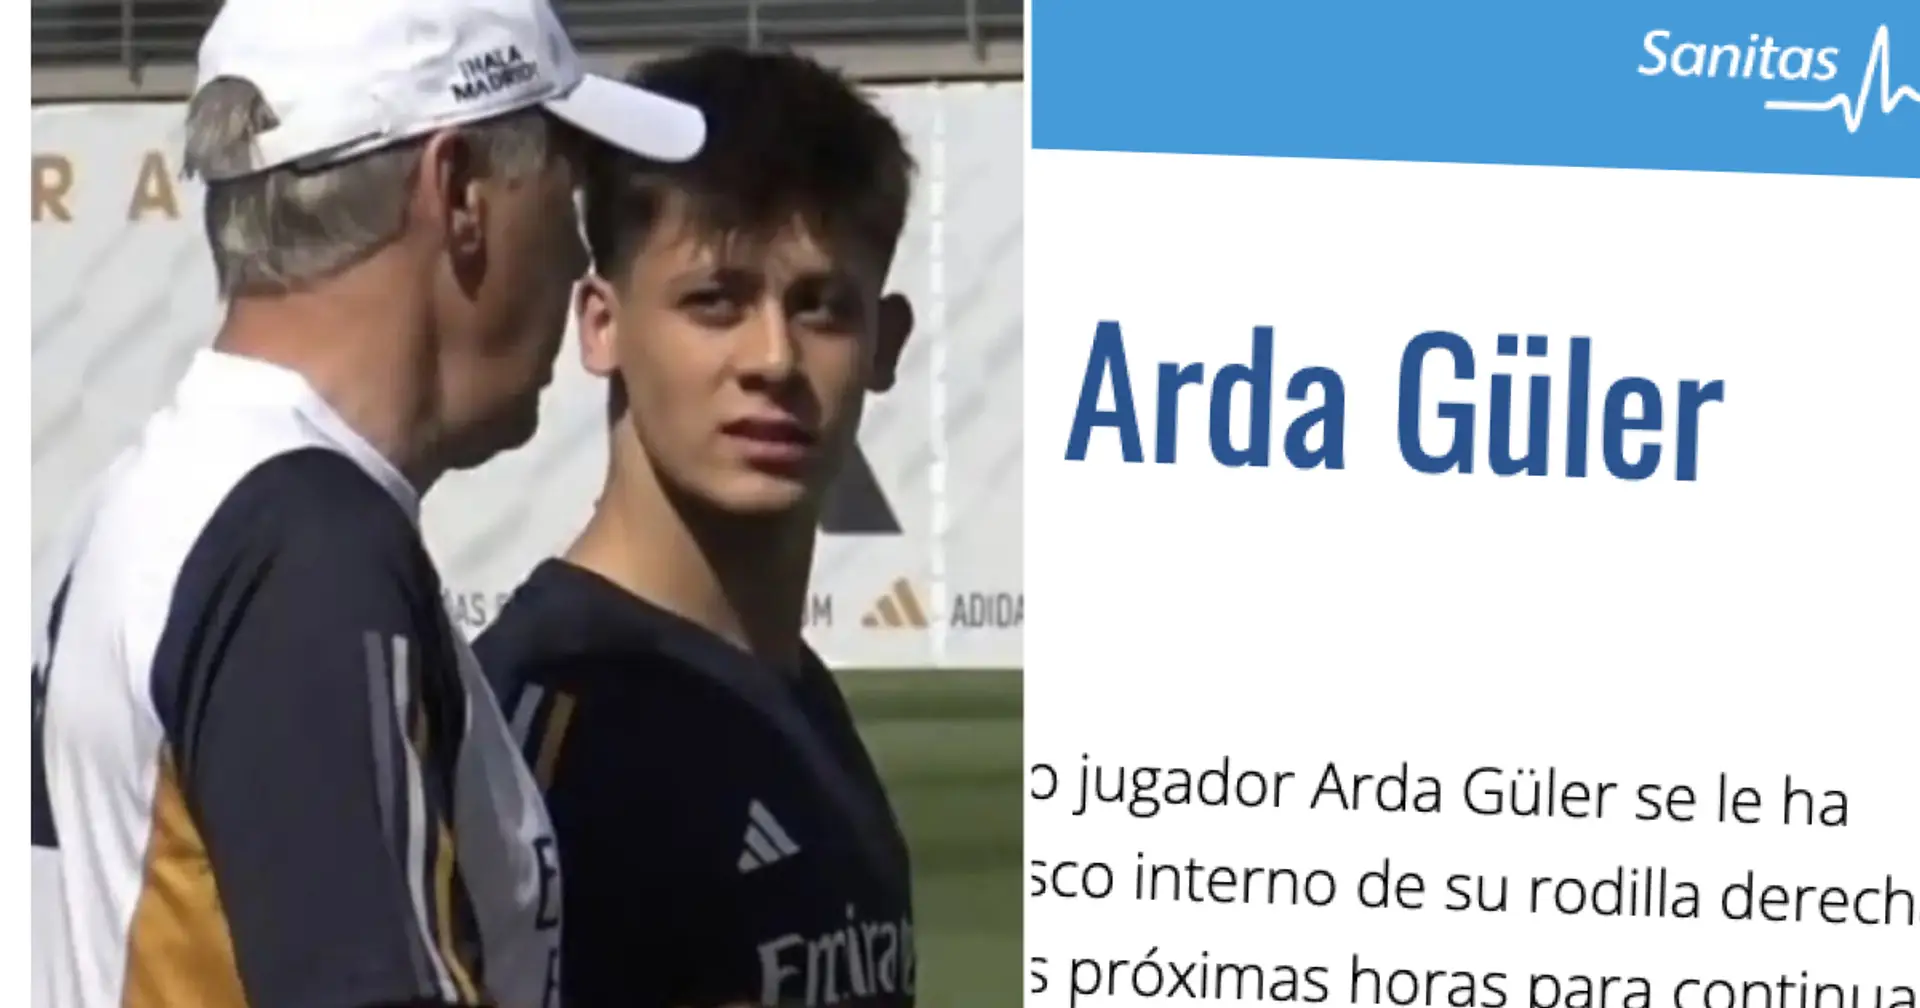 Arda Guler to leave Real Madrid's training camp in US, reason revealed